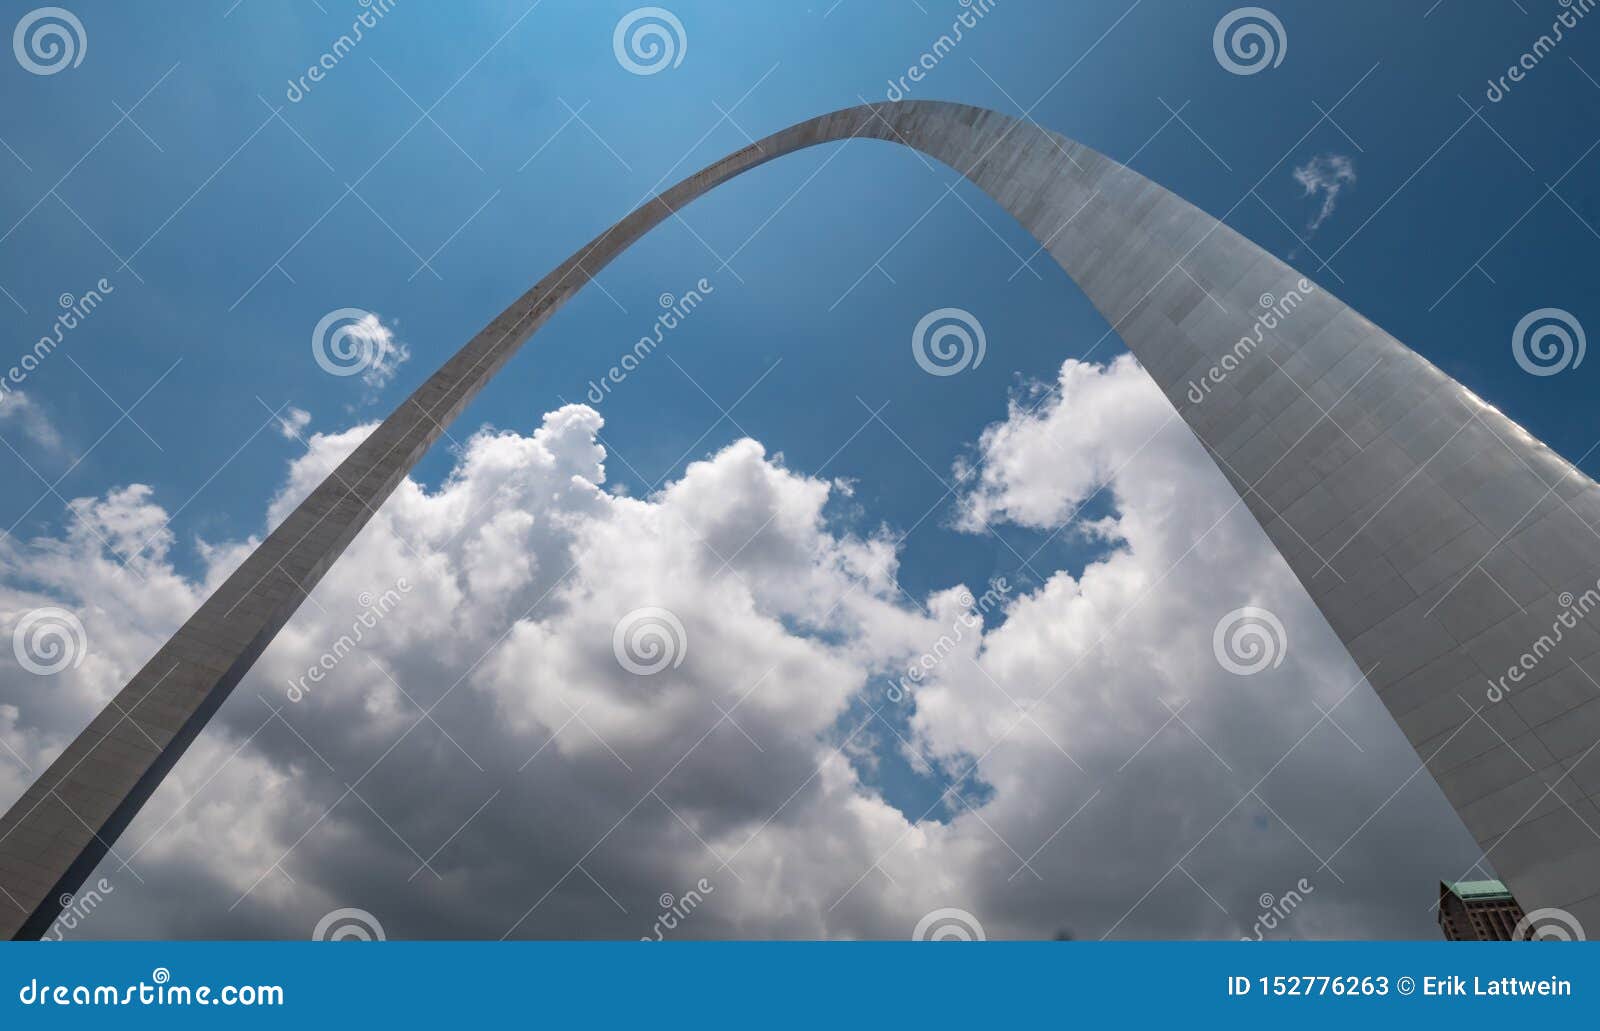 Famous Gateway Arch In St. Louis - ST. LOUIS, USA - JUNE 19, 2019 Editorial Stock Photo - Image ...